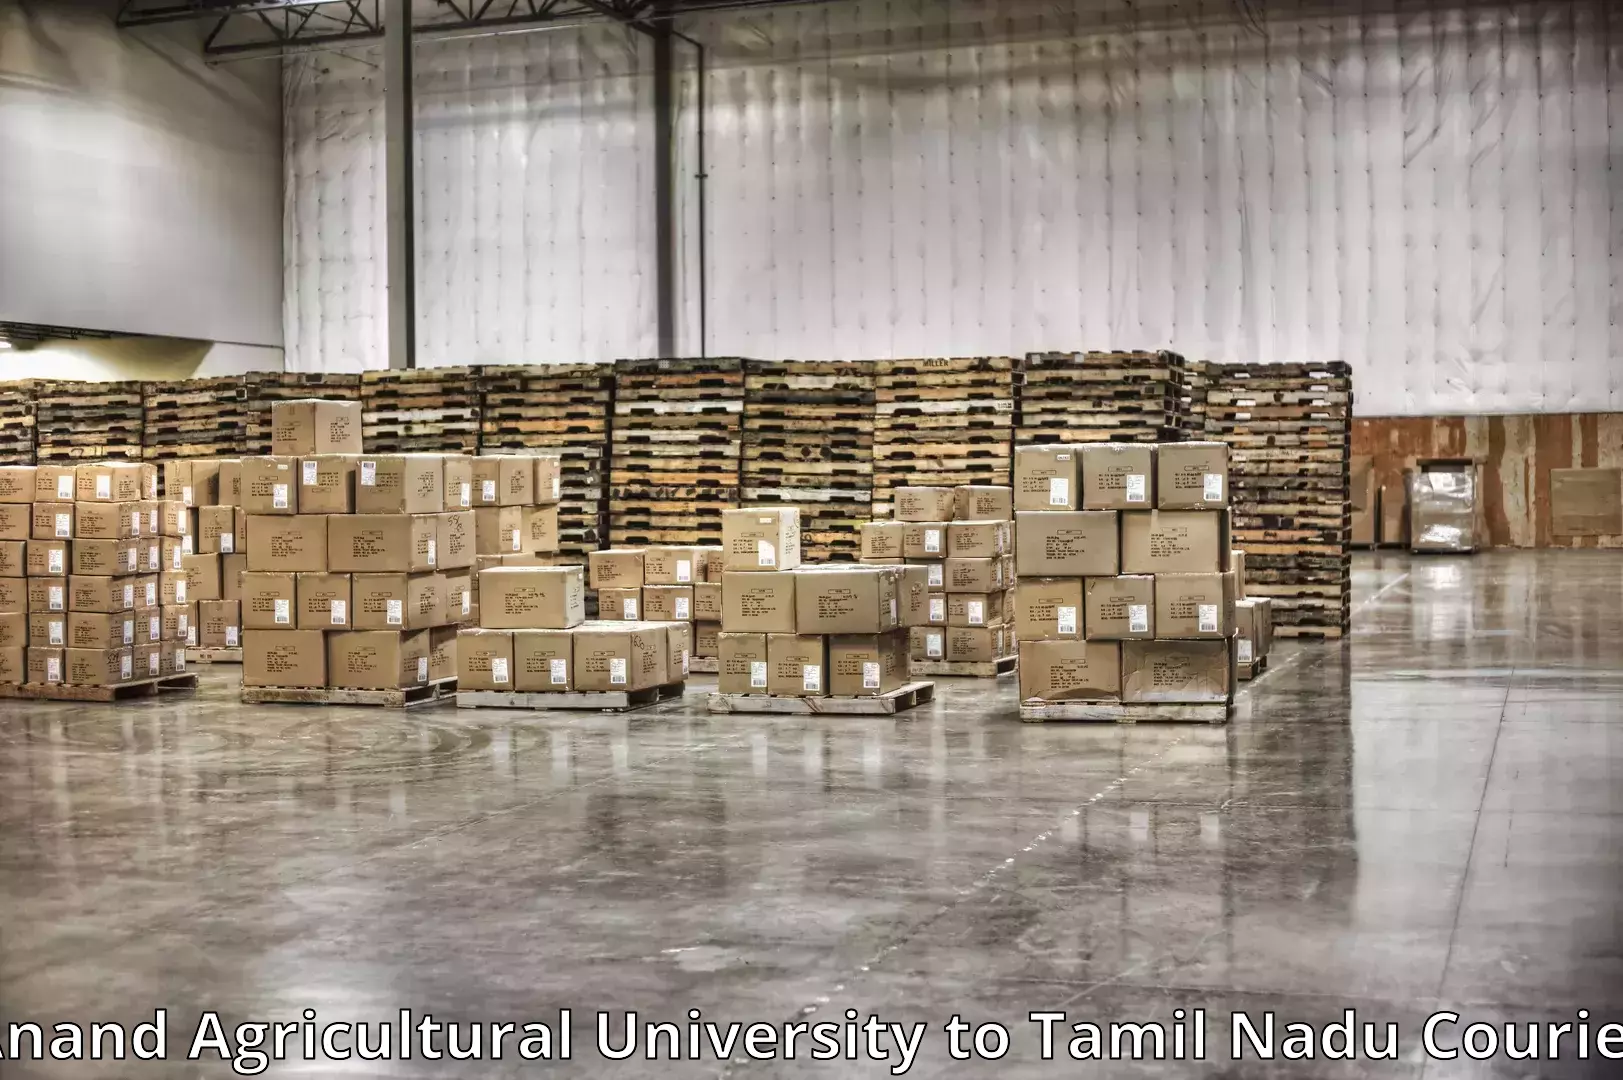 Furniture transport company Anand Agricultural University to Coimbatore